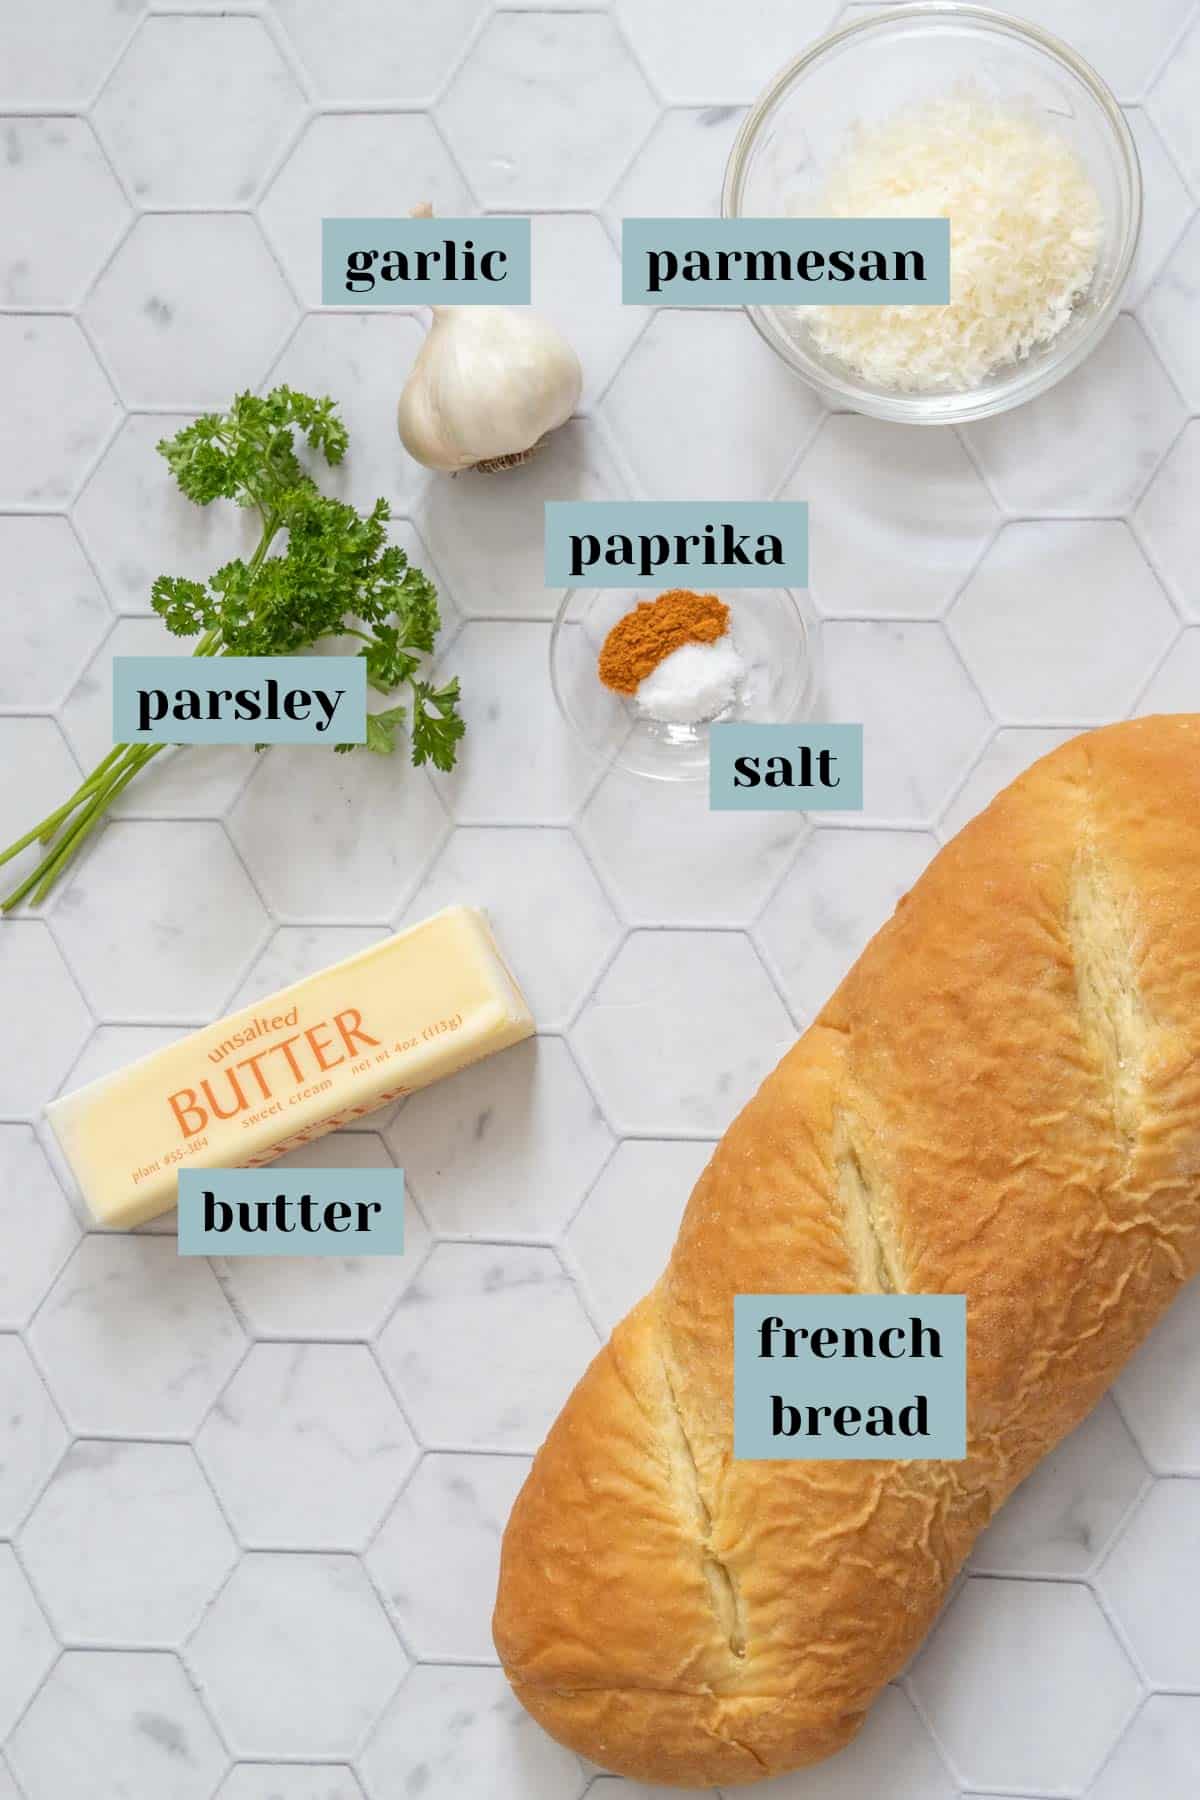 Ingredients for homemade garlic bread on a tile surface with labels.